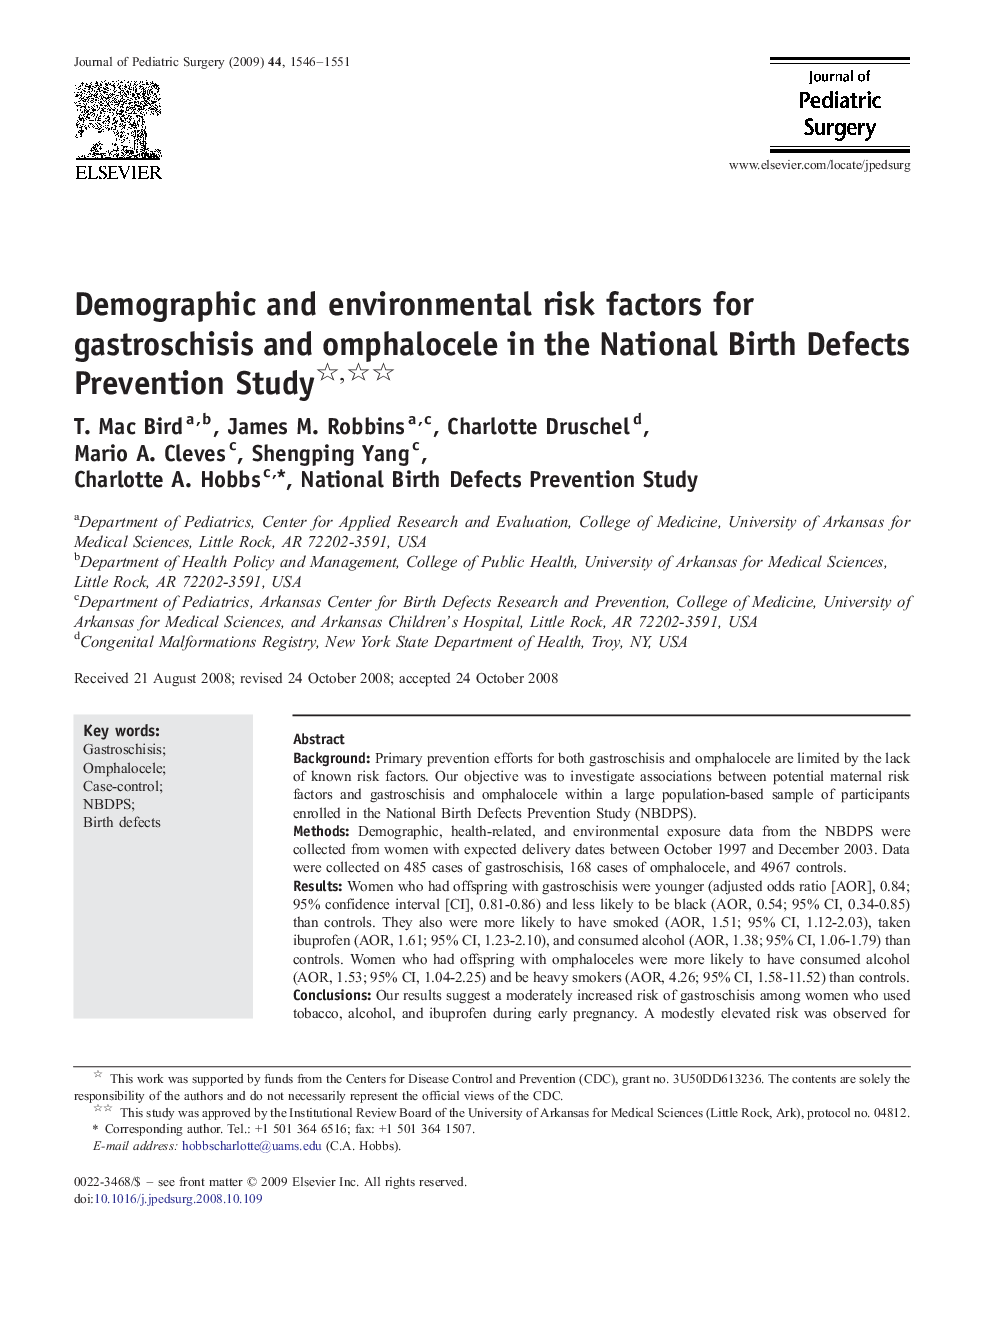 Demographic and environmental risk factors for gastroschisis and omphalocele in the National Birth Defects Prevention Study 